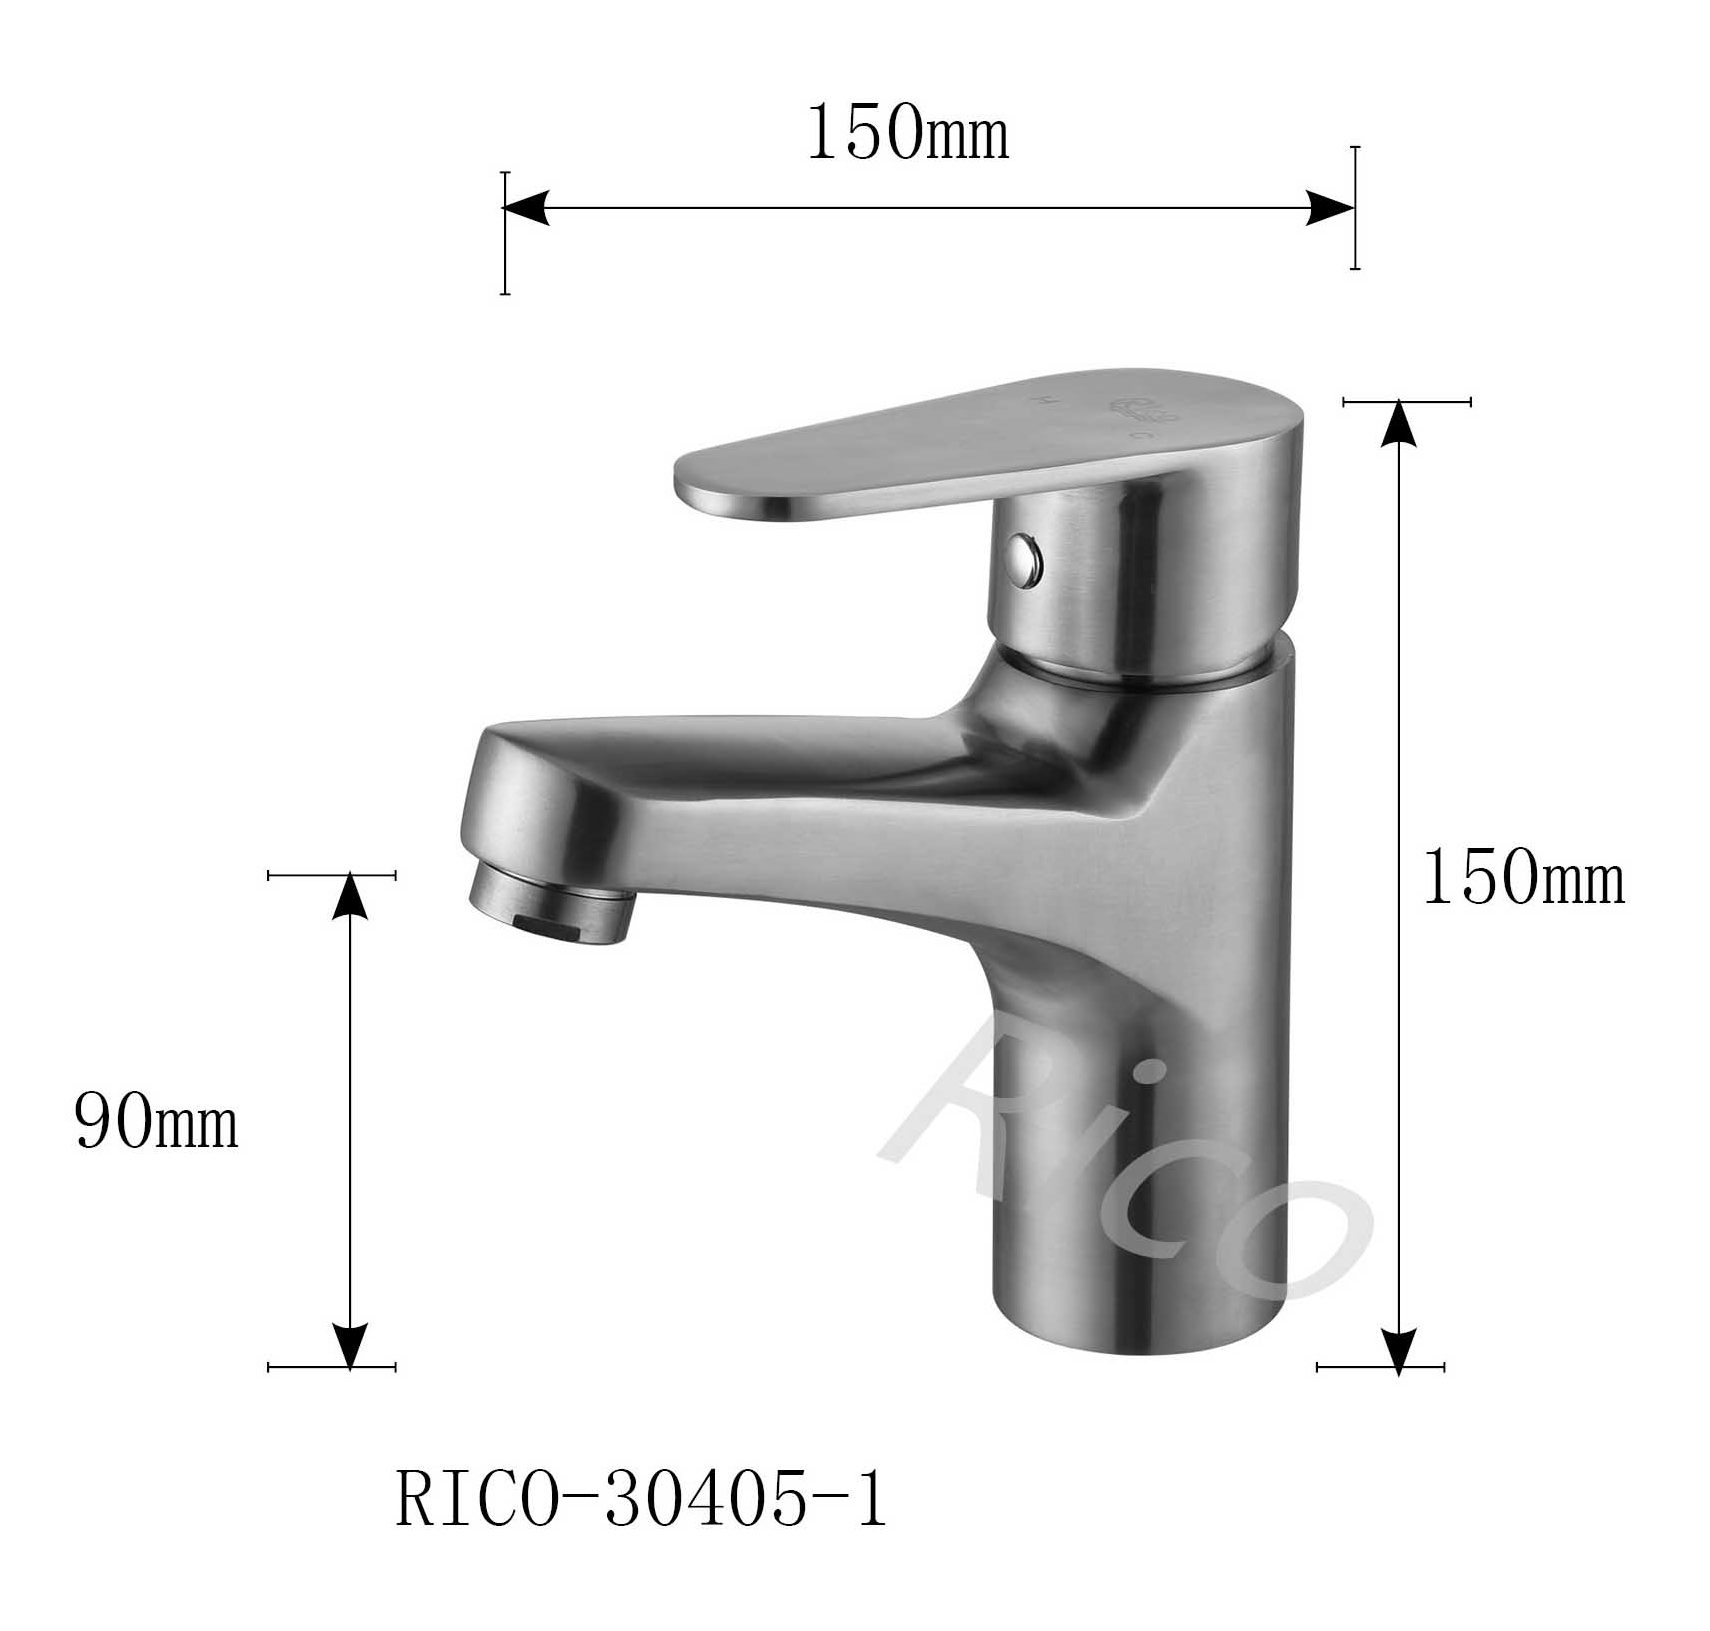 Rico : Stainless Steel Basin Mixer – RICO-30405-1